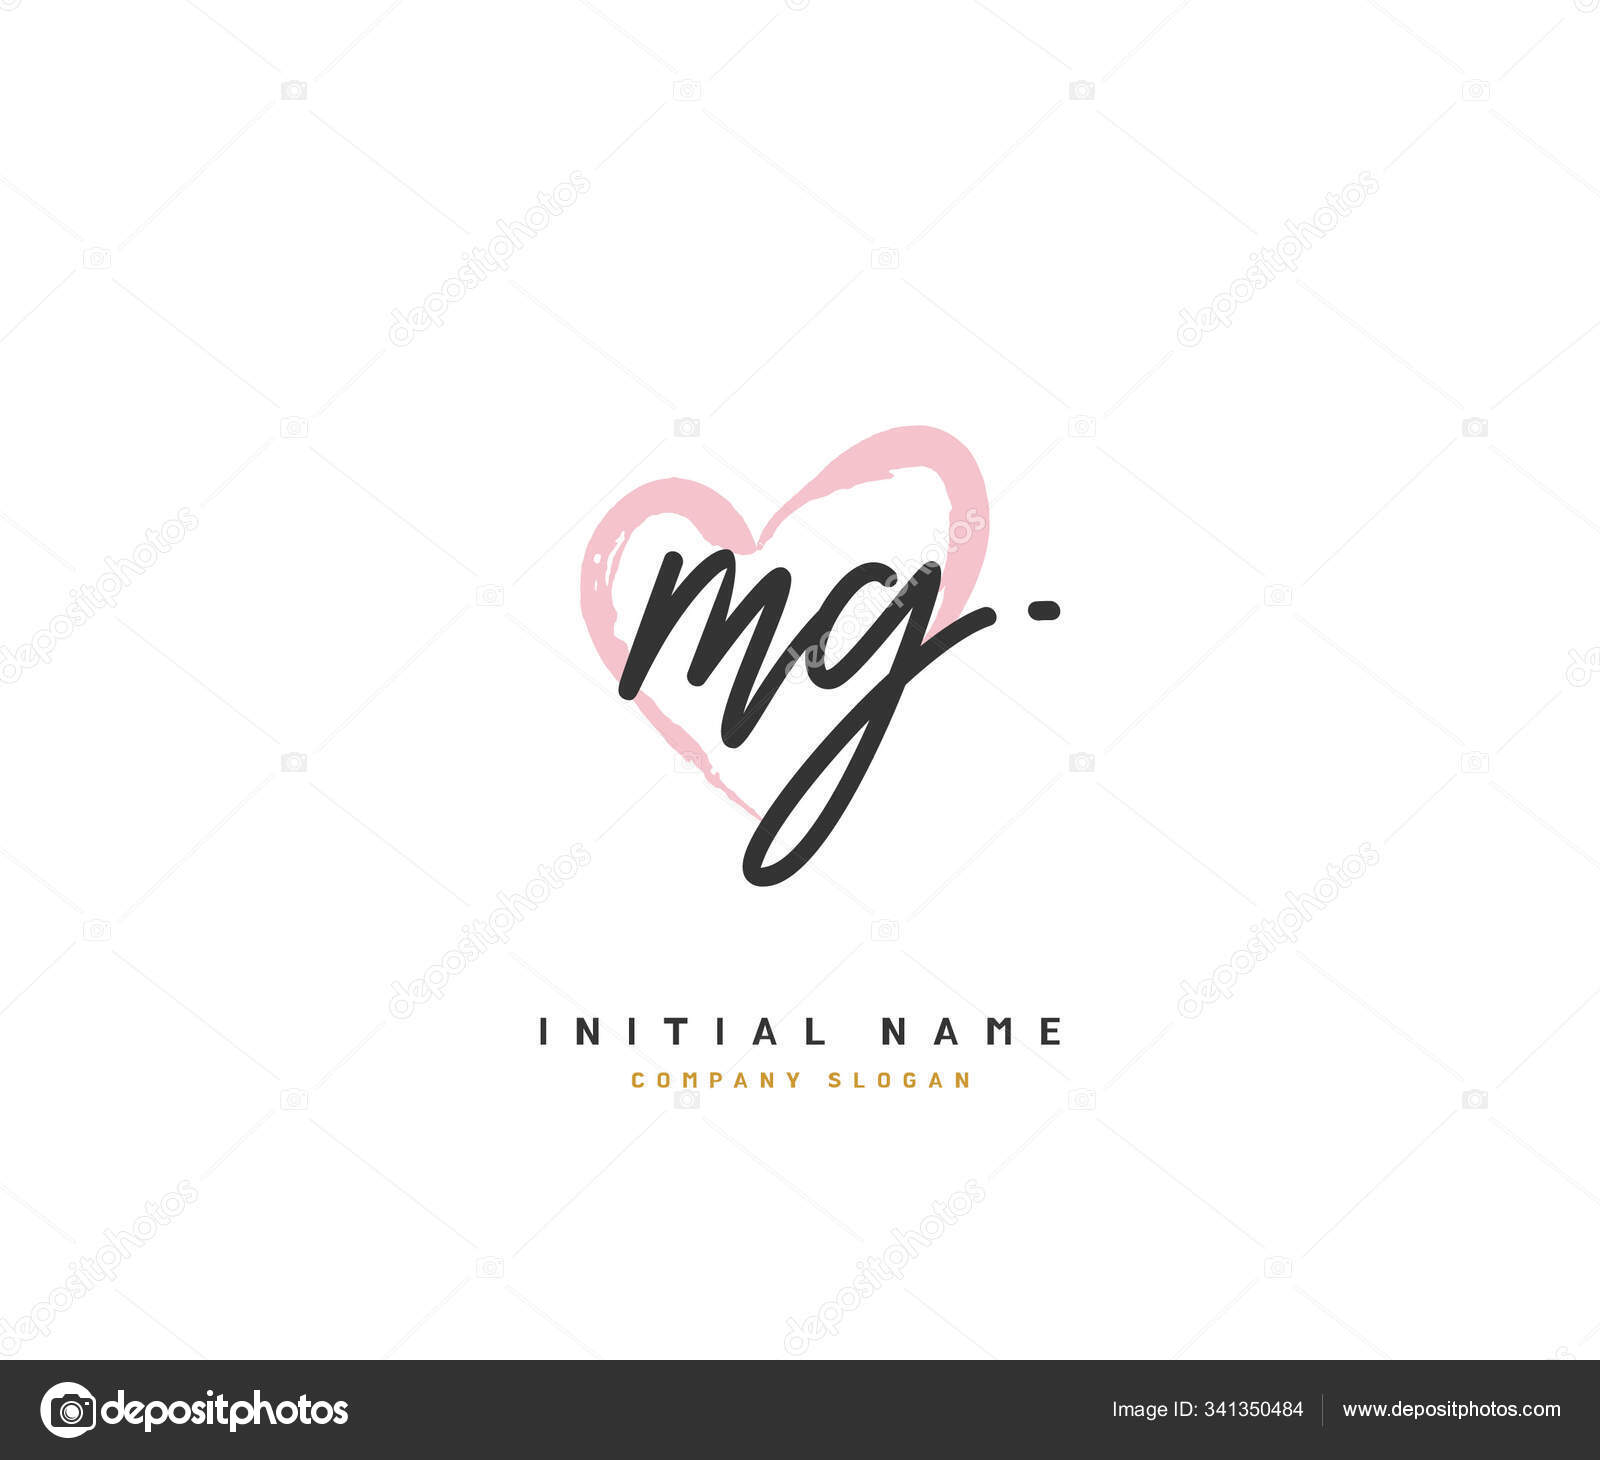 MG monogram logo.Typographic signature icon.Decorative swirl lowercase  letter m and letter g.Lettering sign isolated on dark fund.Wedding,  fashion, beauty alphabet initials.Elegant, luxury style. Stock Vector